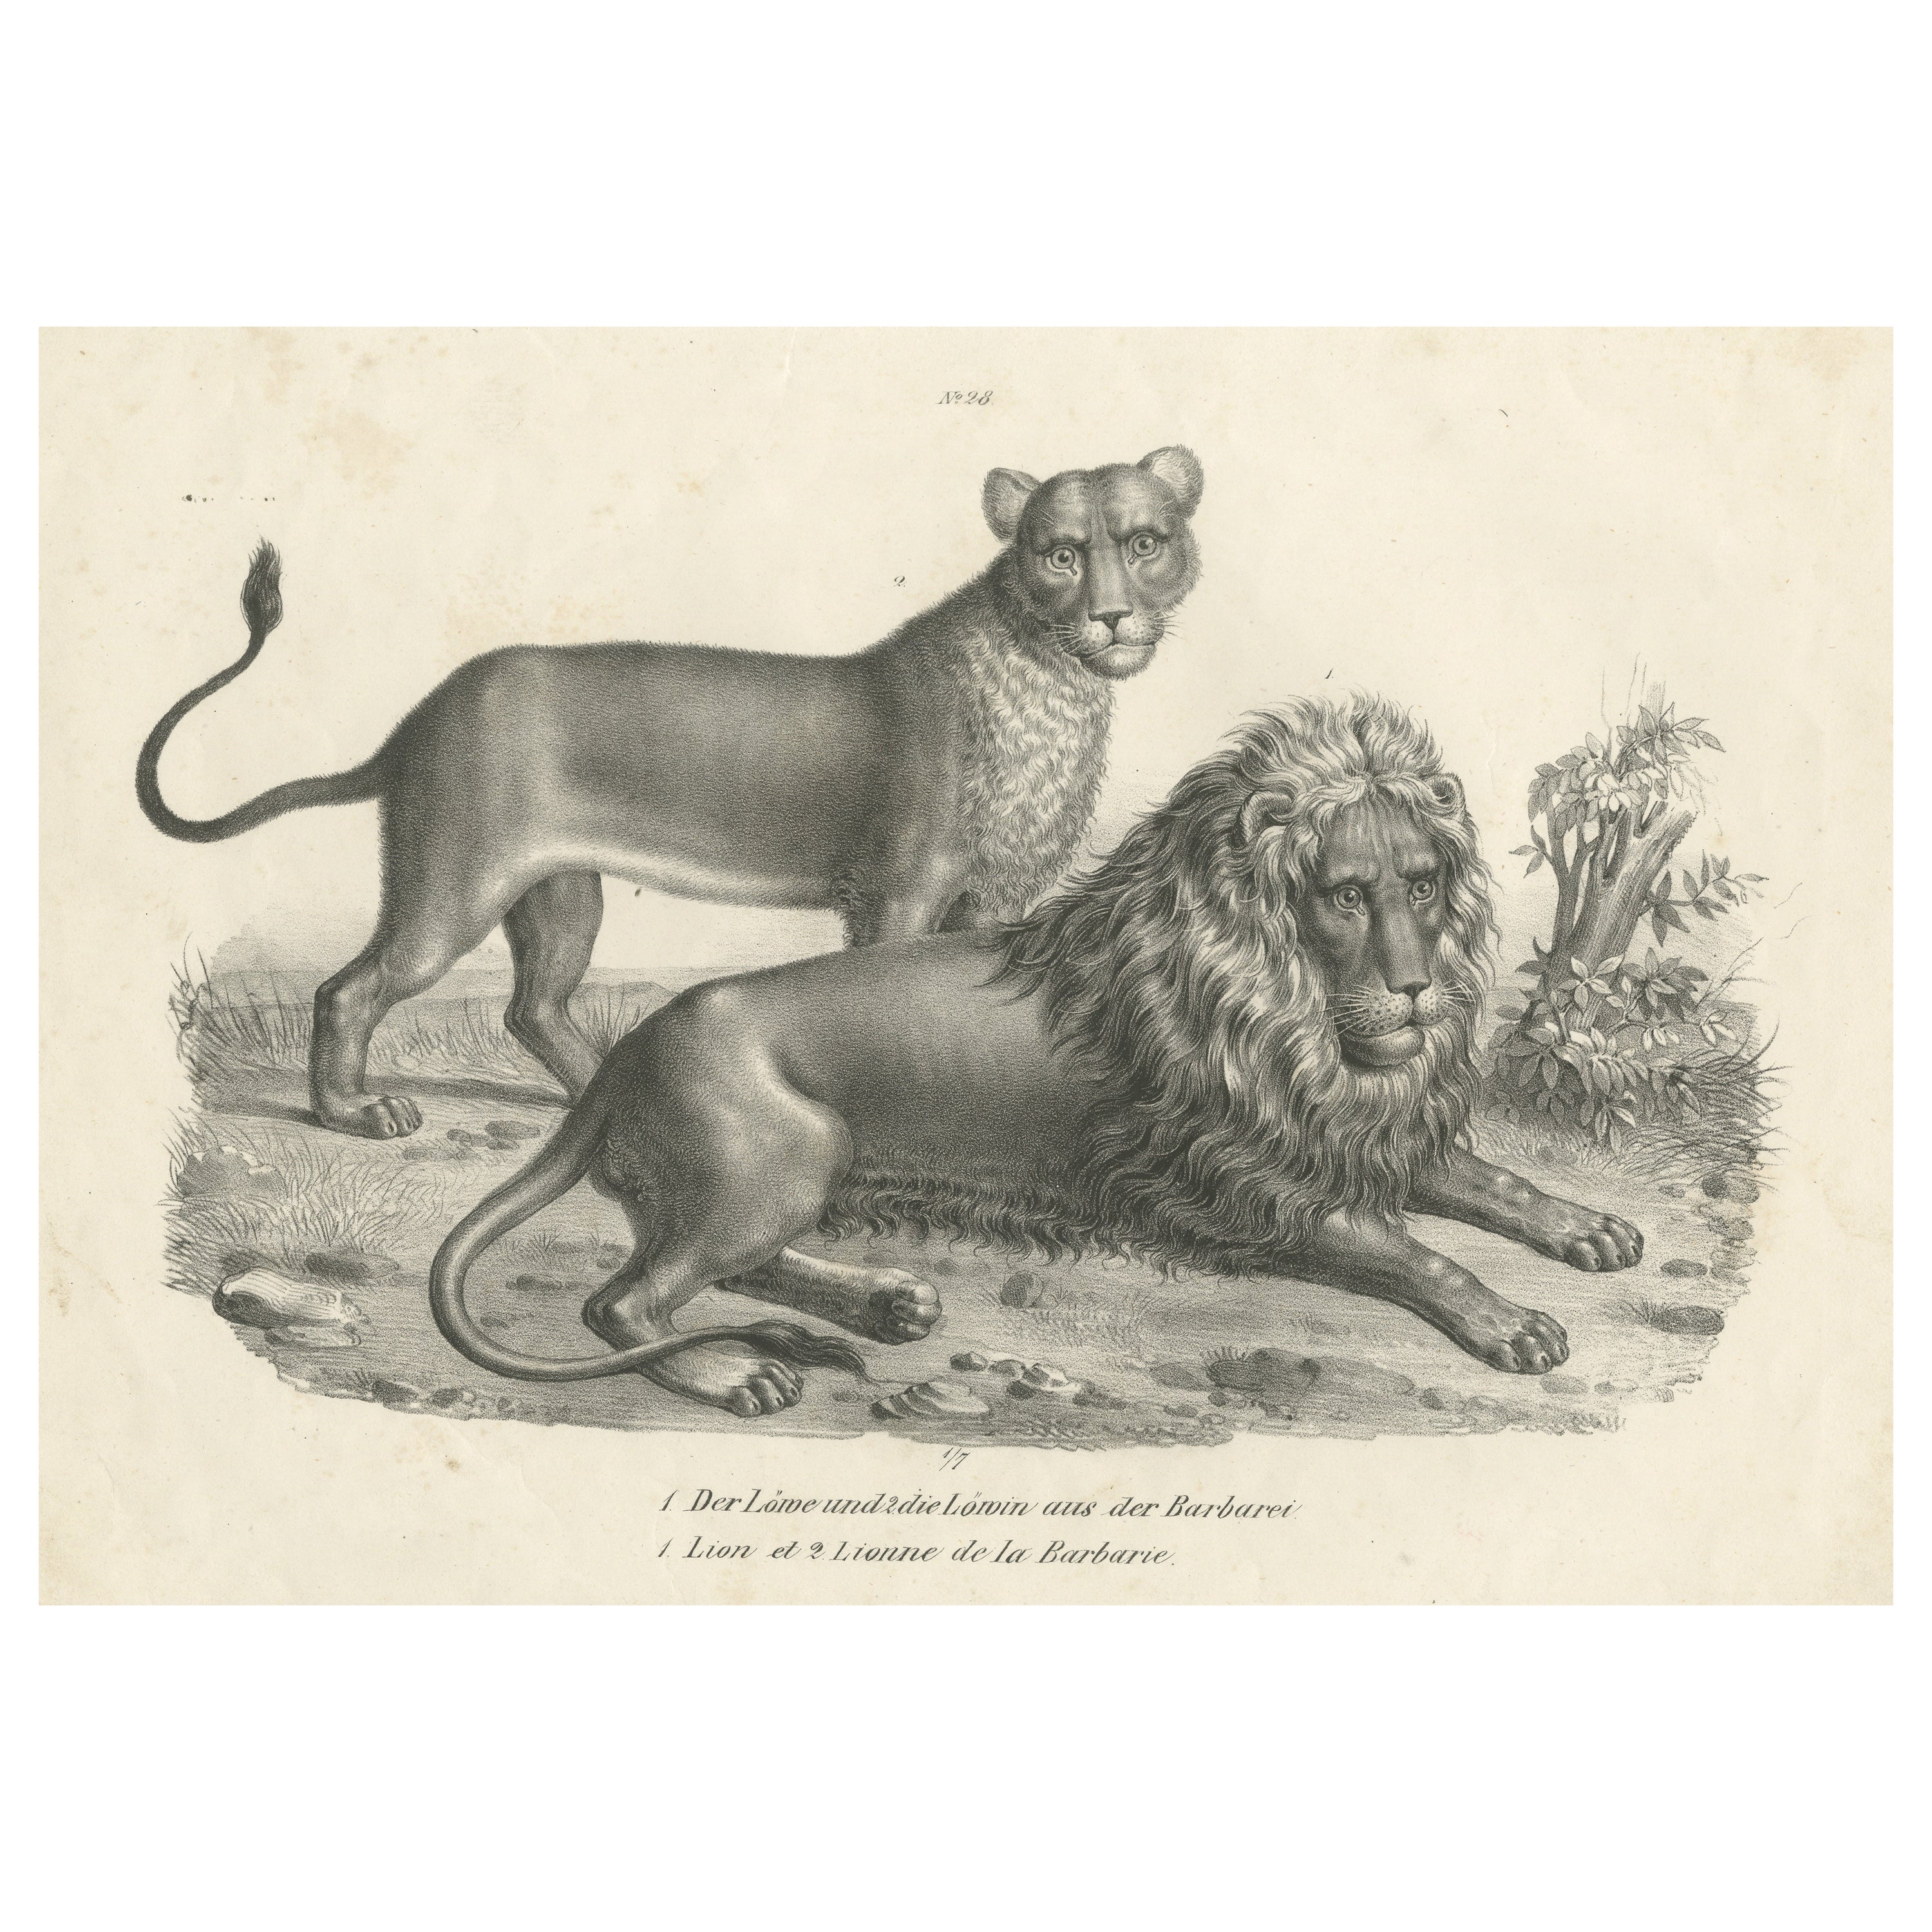 Original Antique Print of a Barbary Lion and Lioness by Brodtmann